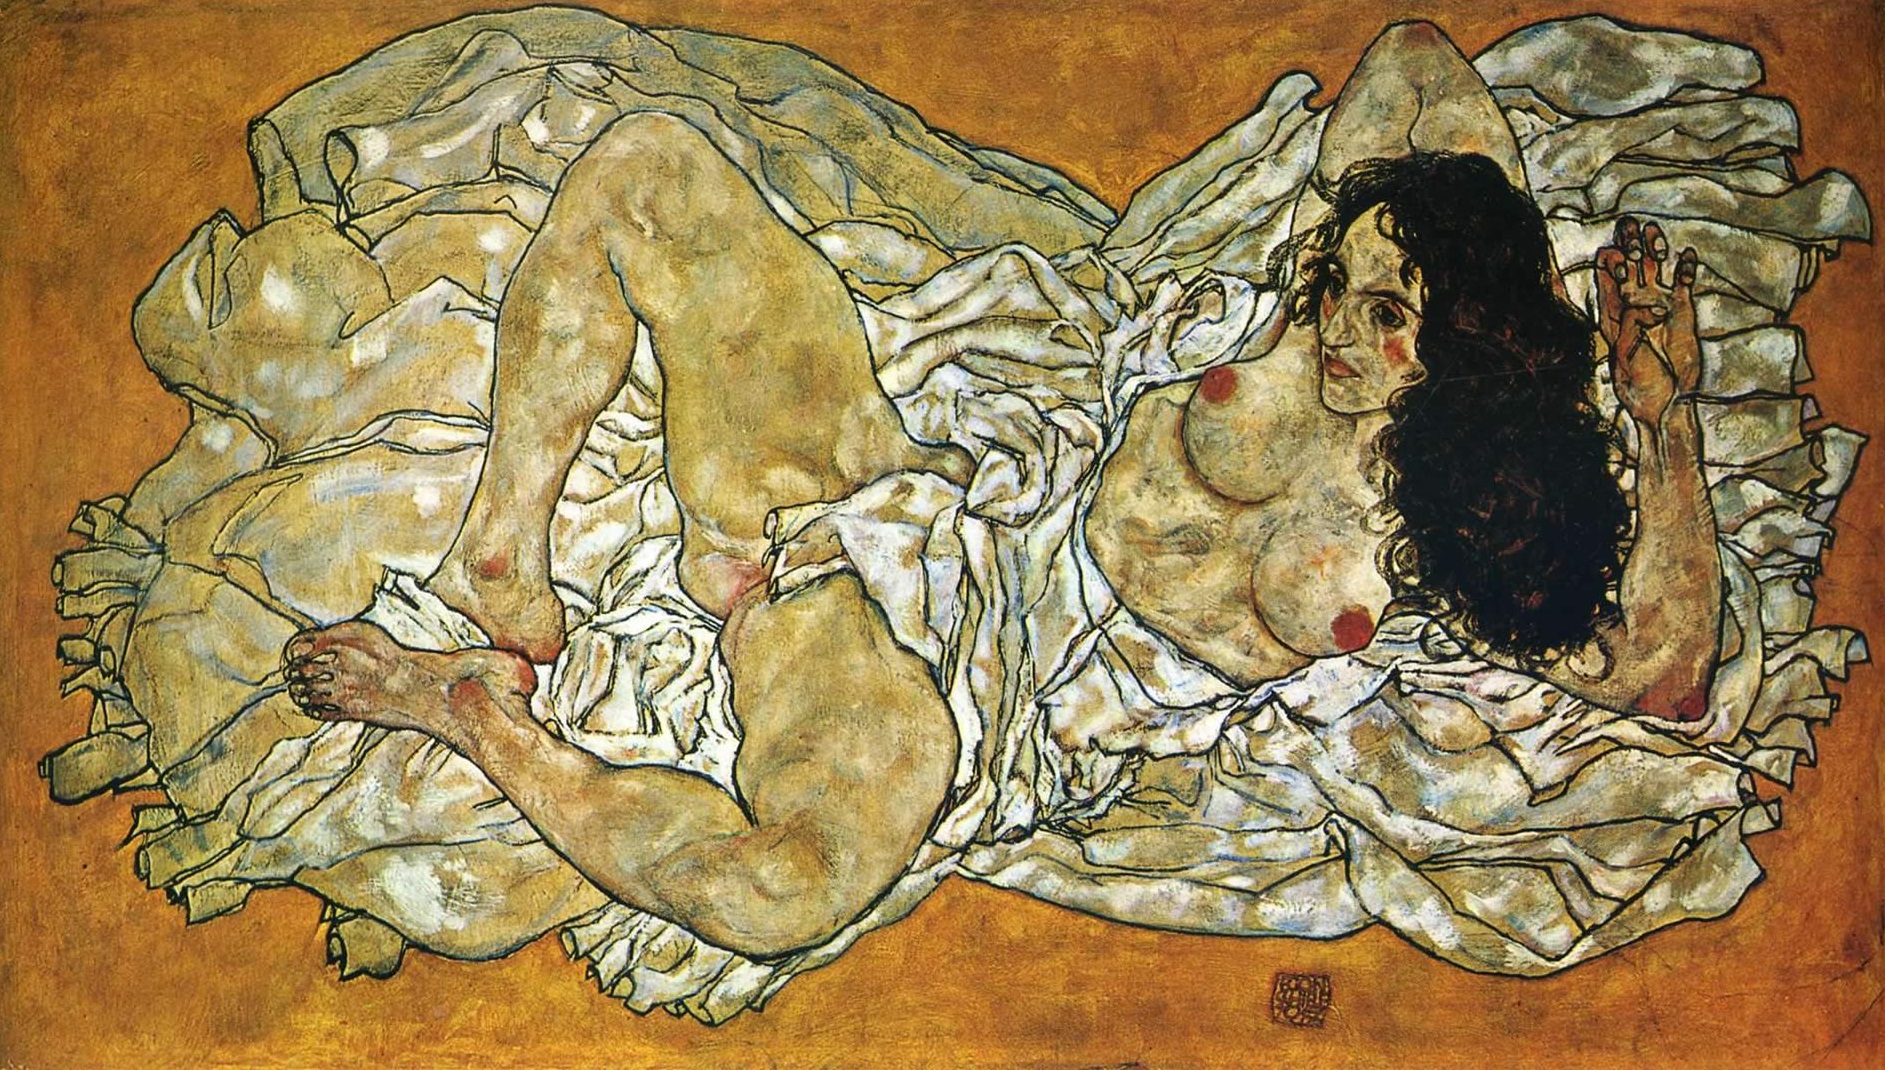 The Reclining Woman, 1917 by Egon Schiele